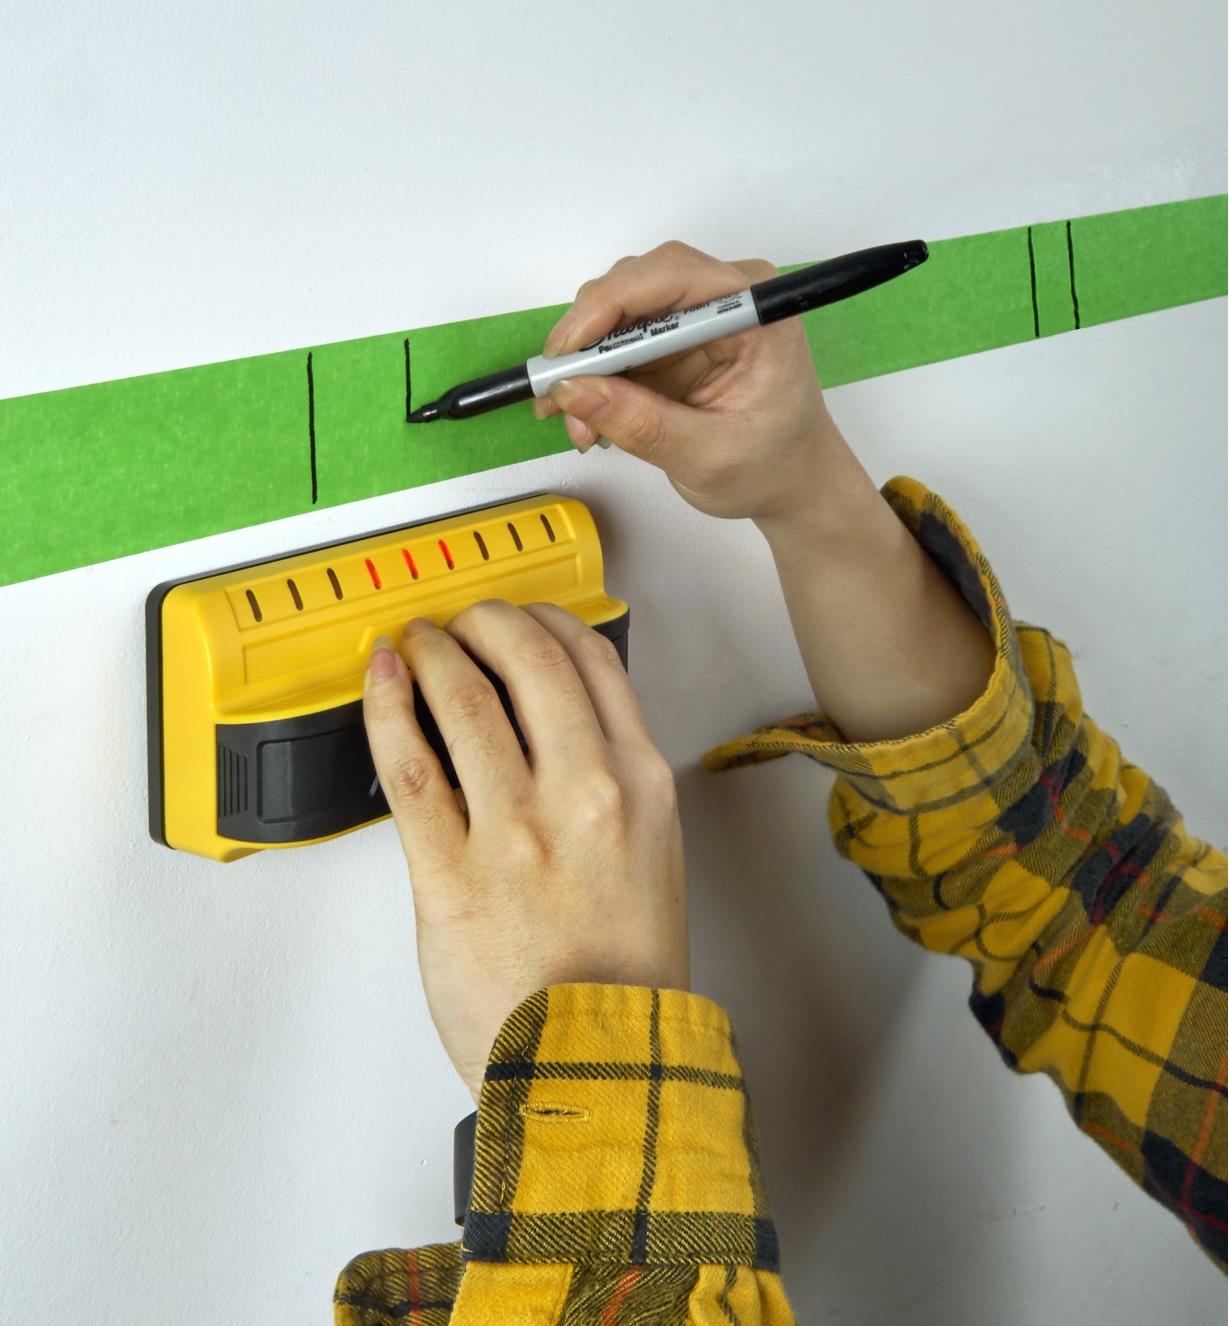 Using a Franklin M90 stud detector to mark the outlines of stud locations in a finished wall